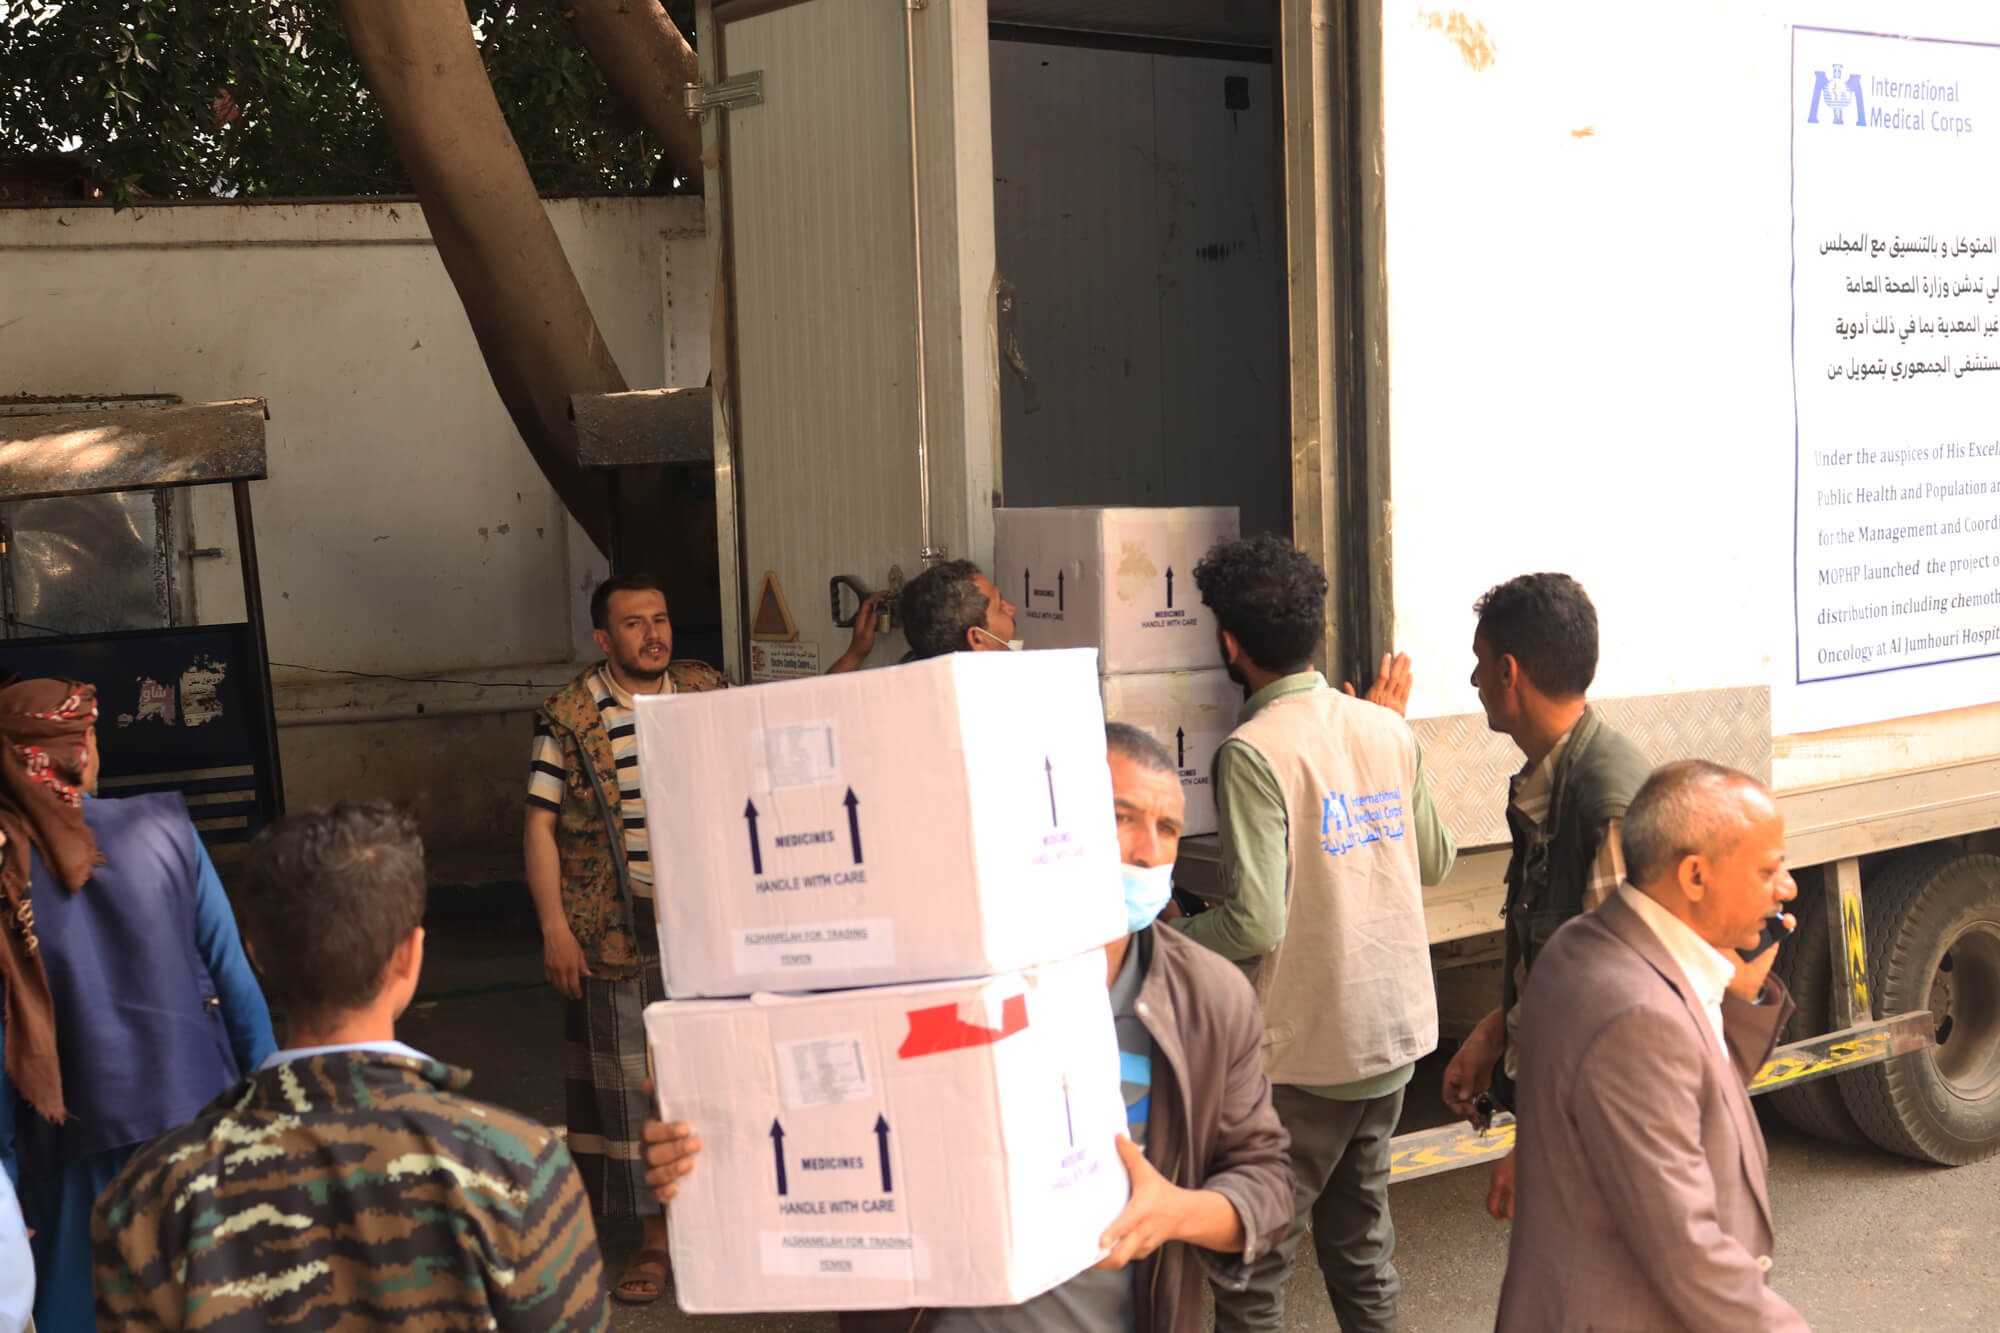 Members of our Health Program Team offload newly imported cancer medications at the National Oncology Center in Yemen’s capital, Sana’a. The new drugs are the first of their kind to reach Yemen.